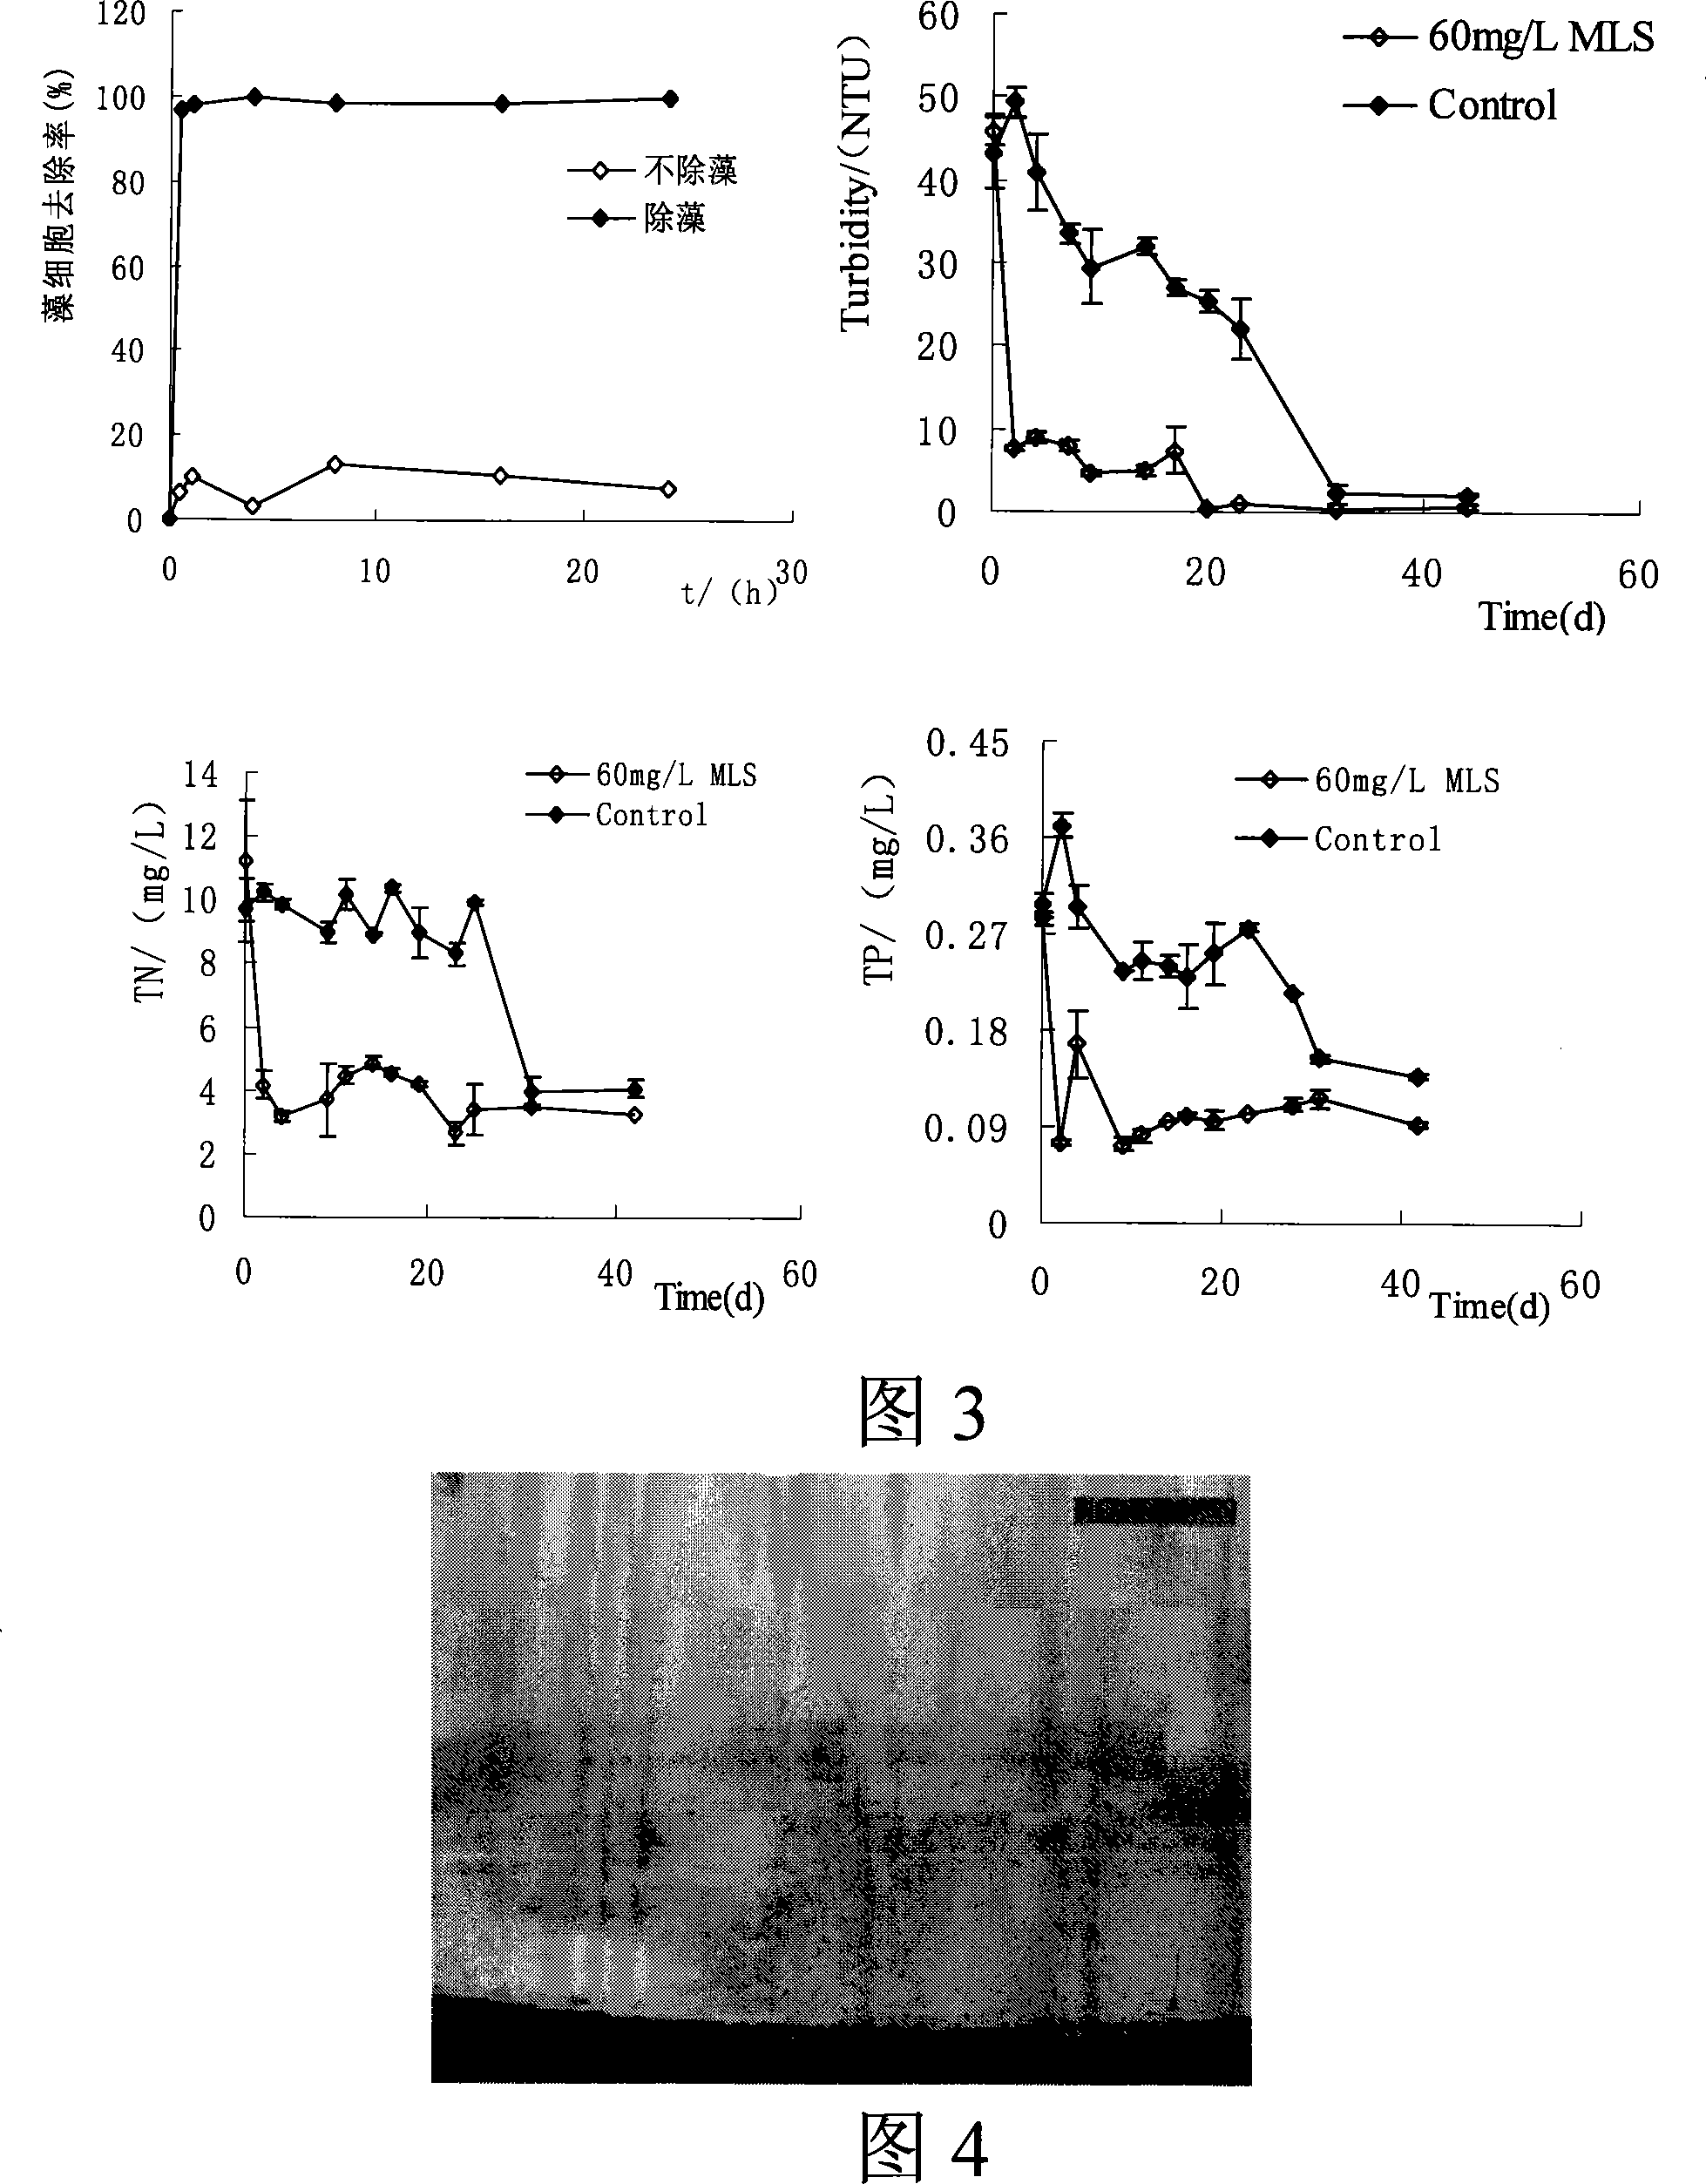 Method for fast repairing submerged vegetation by using water quality improvement clearance